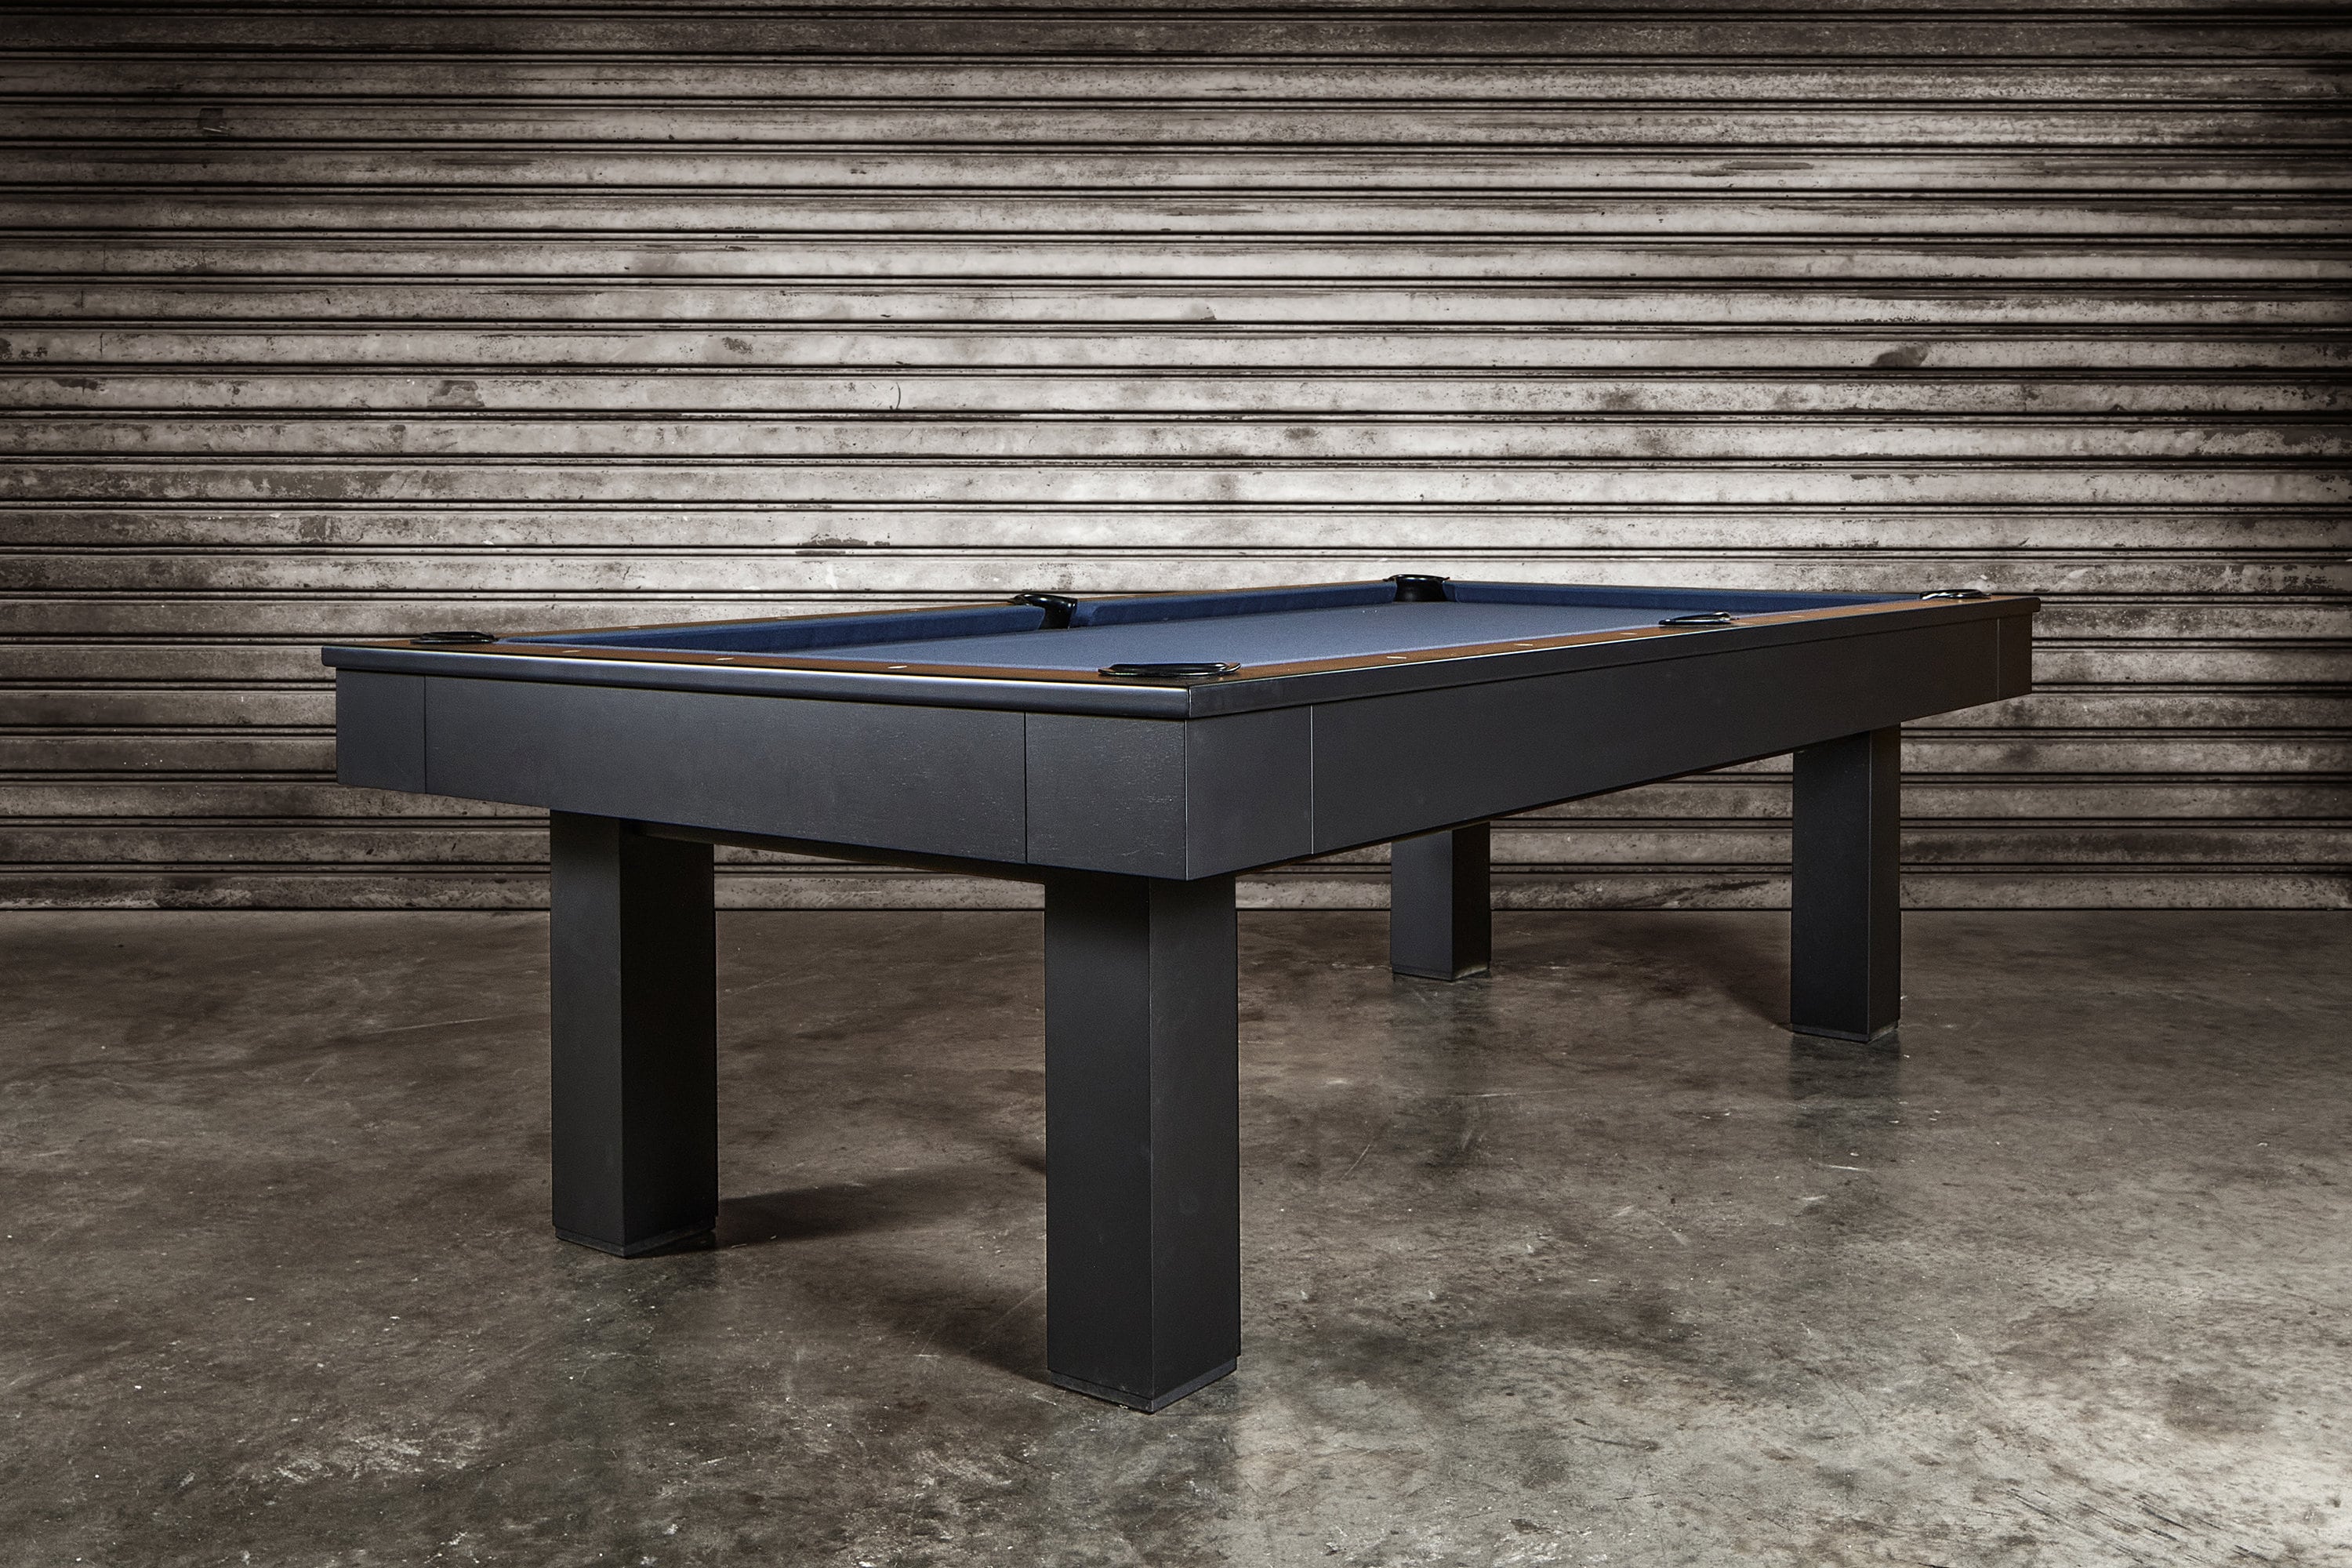 Doc & Holliday Zurich Slate Pool Table White Glove Install - Etsy